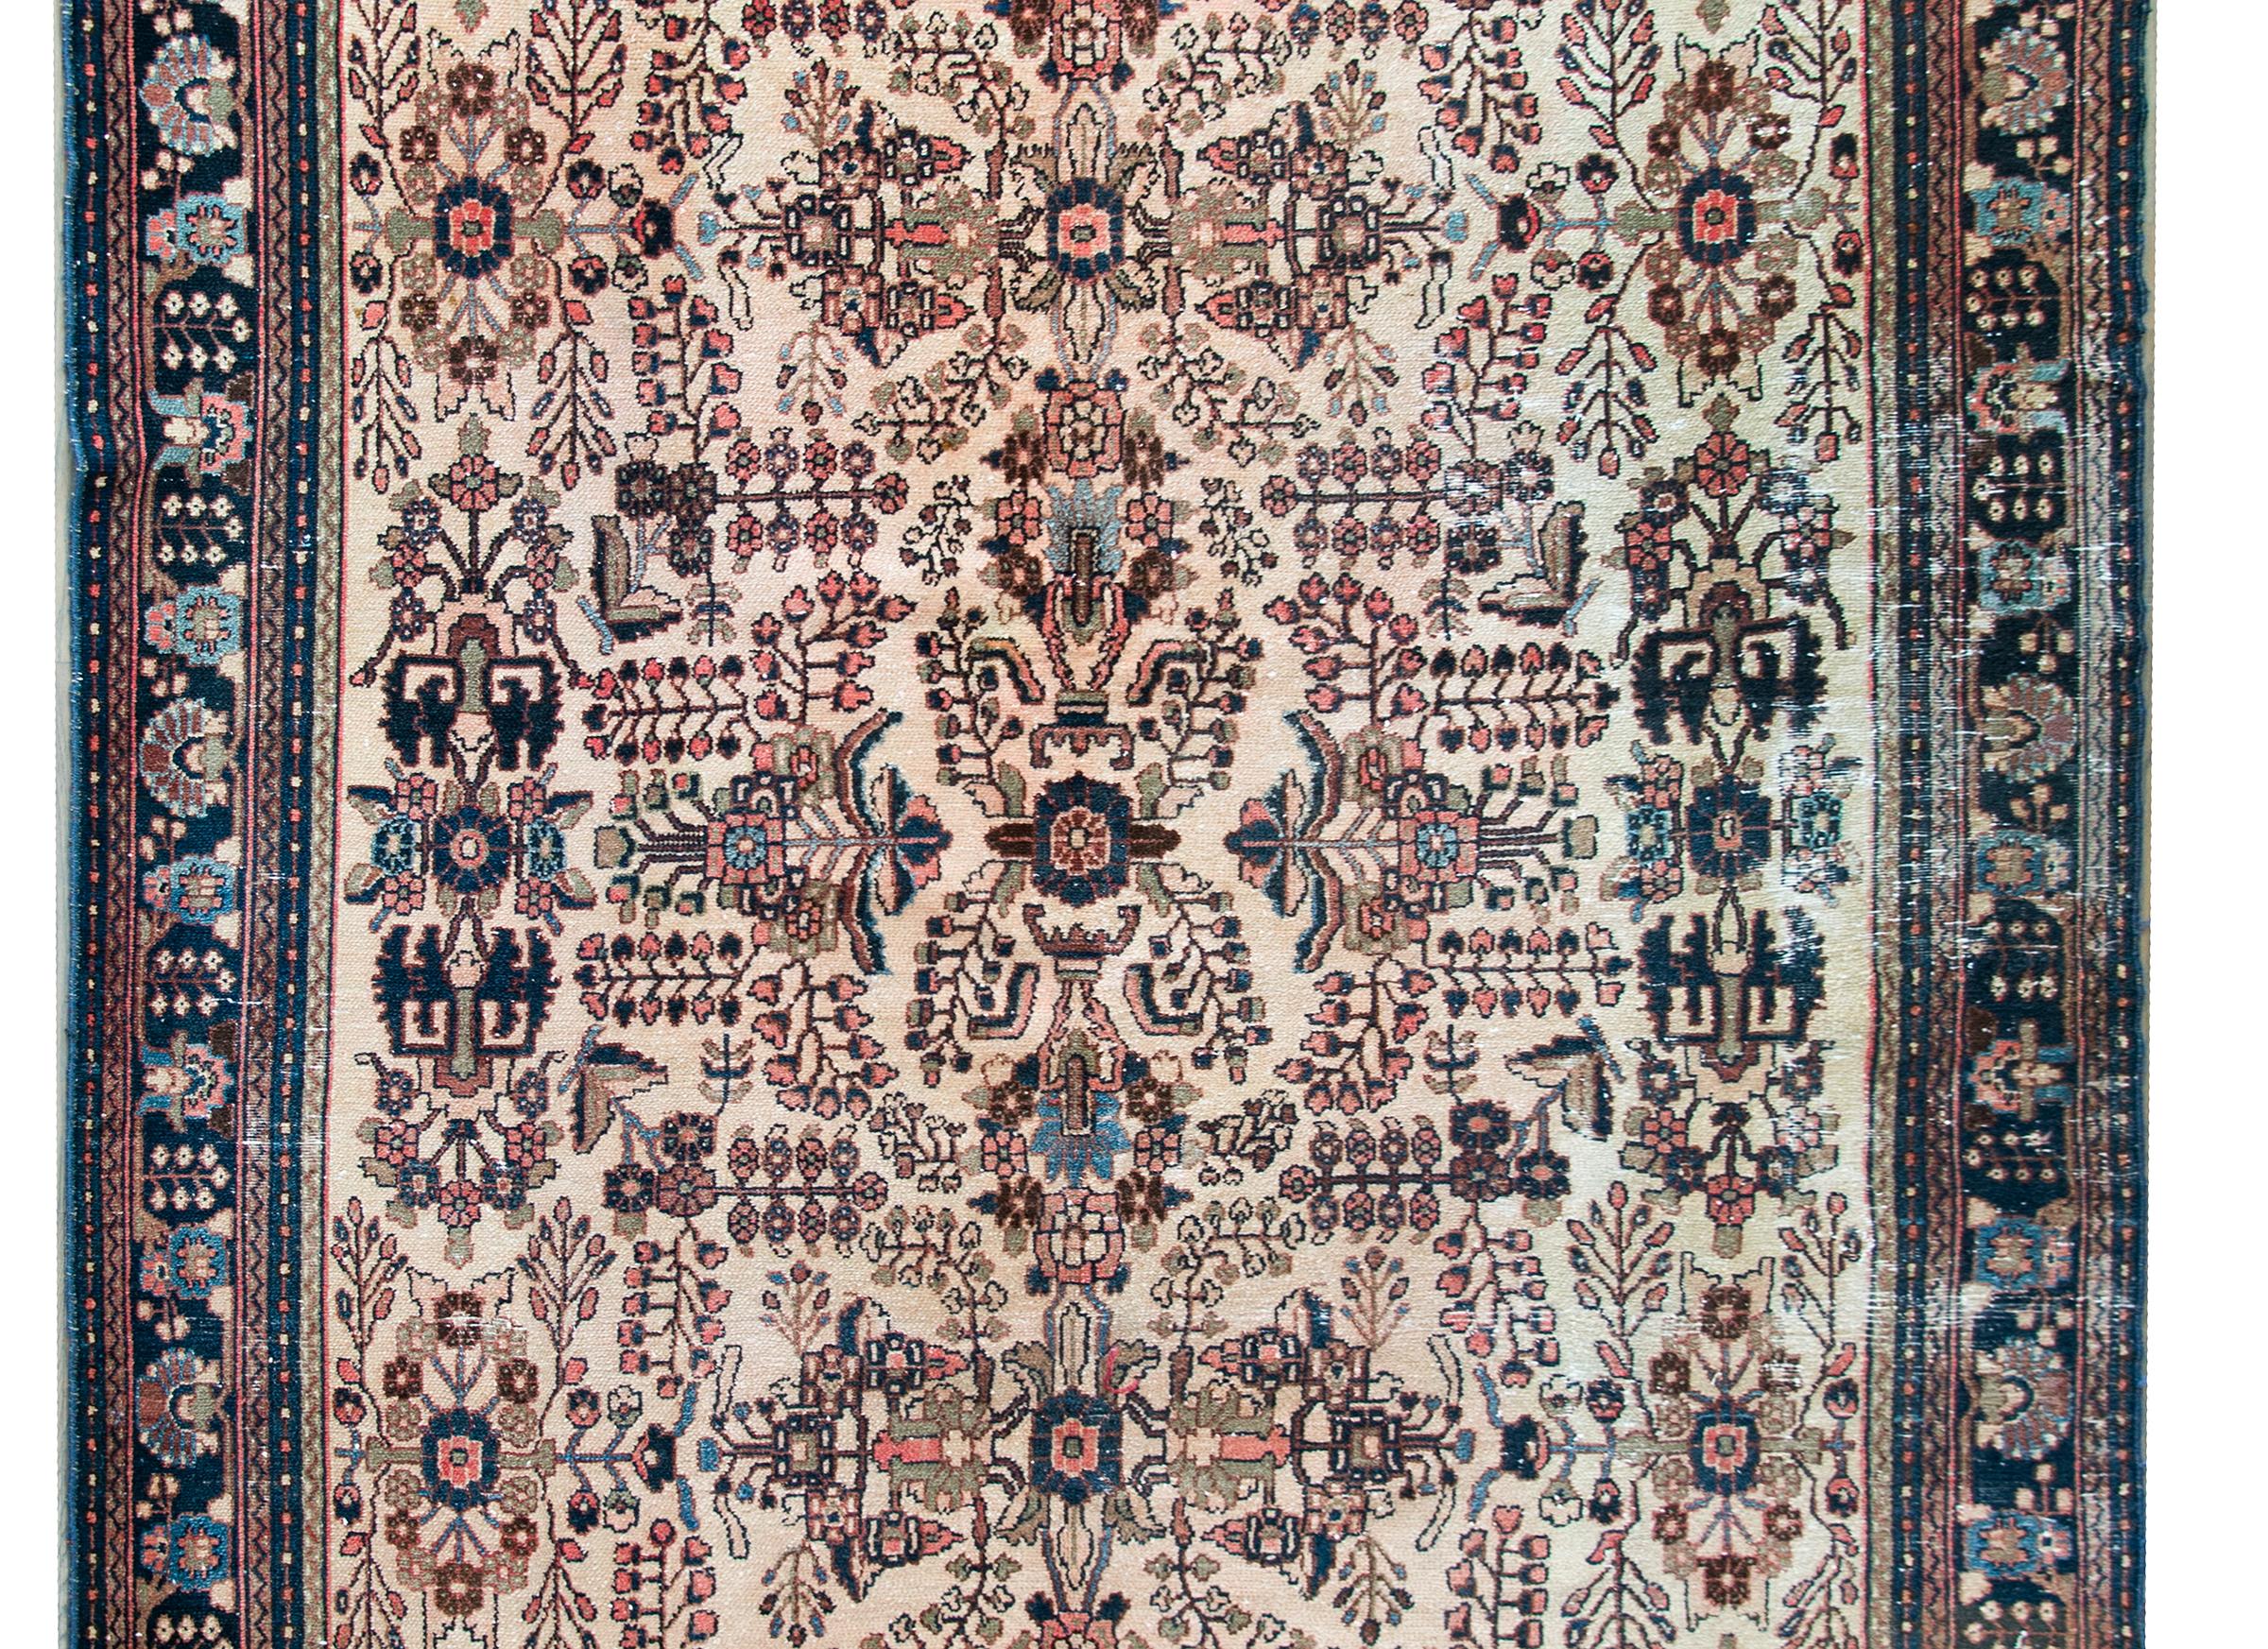 A stunning early 20th century Persian Dargazin rug with a beautiful mirrored floral and tree-of-life pattern woven in unique indigos, greens, golds, and pinks, all set against a cream colored background, and surrounded by a complex border with a